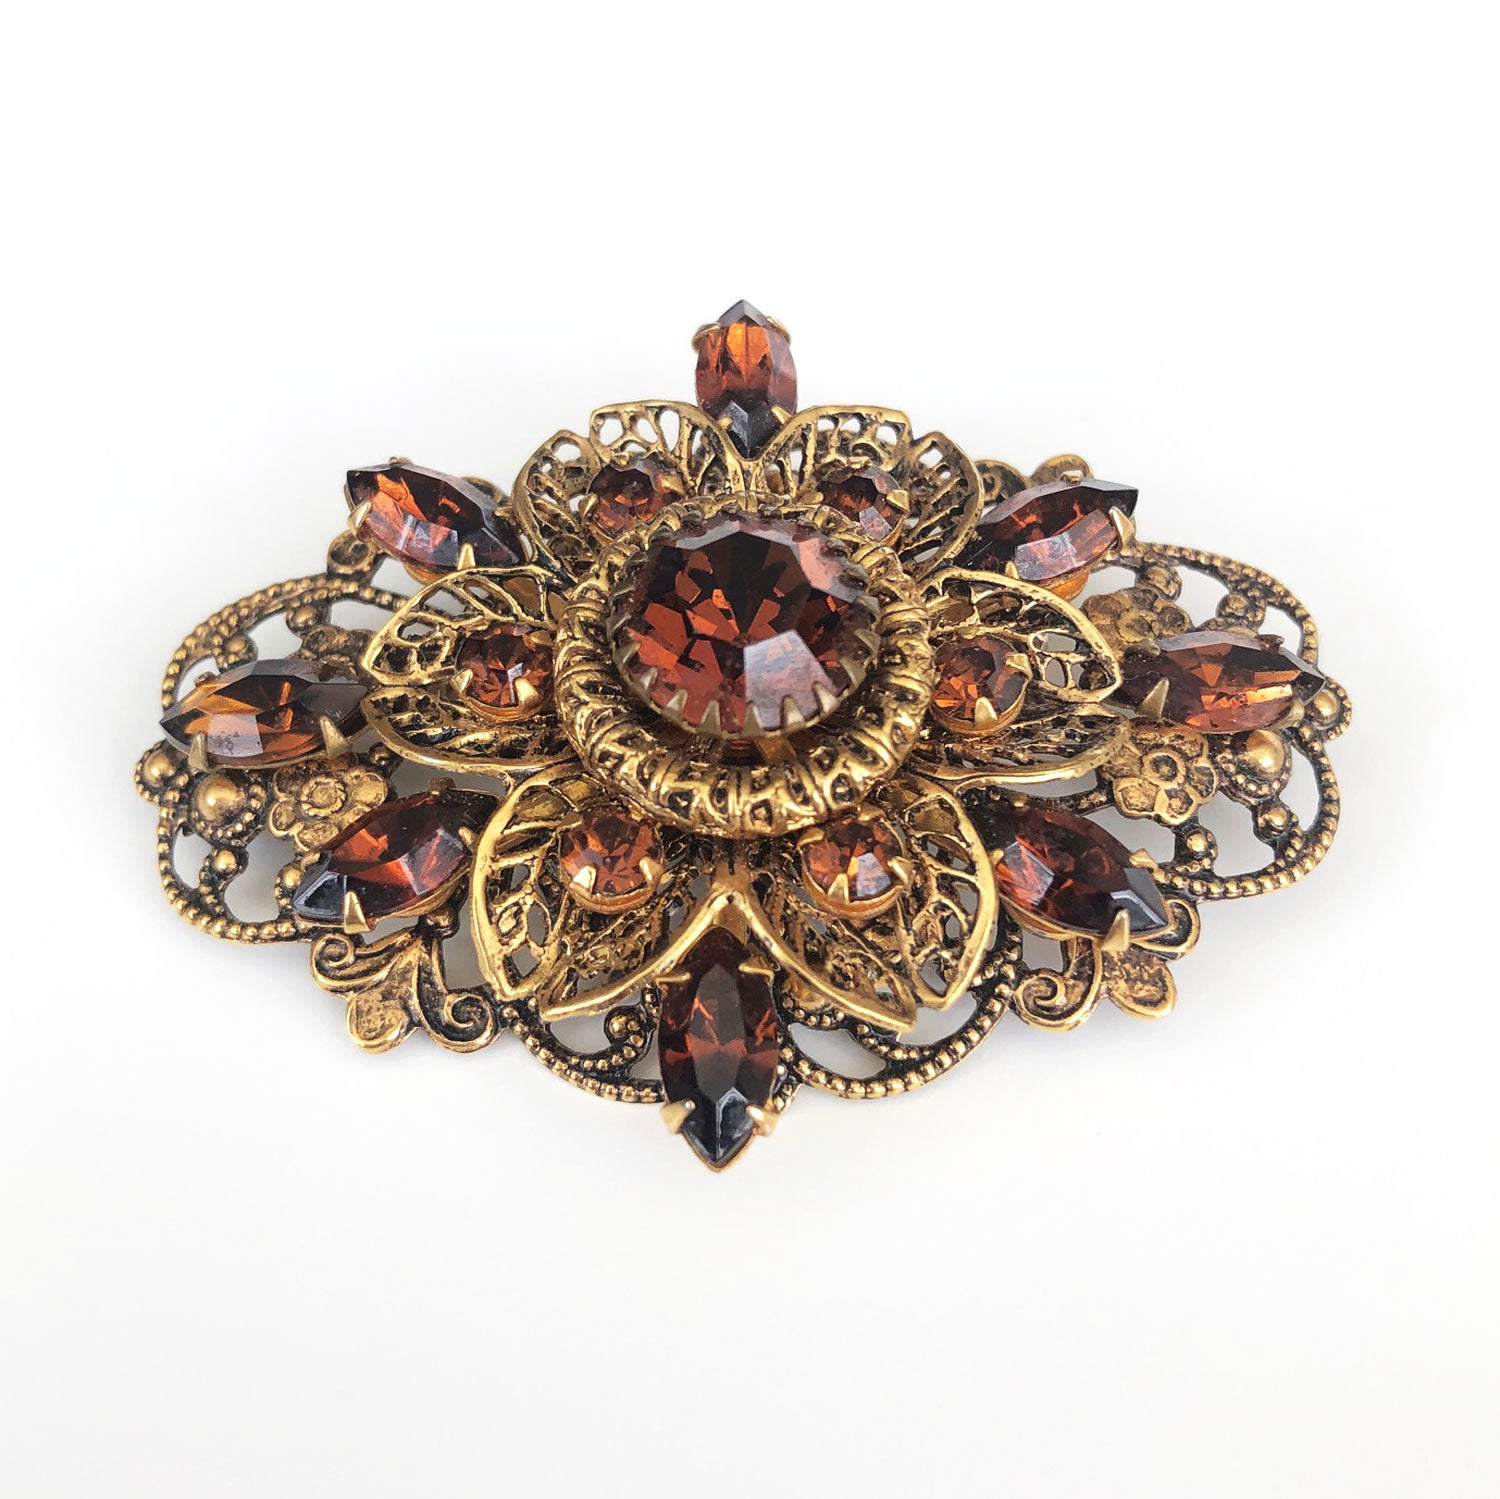 VIntage Brooches